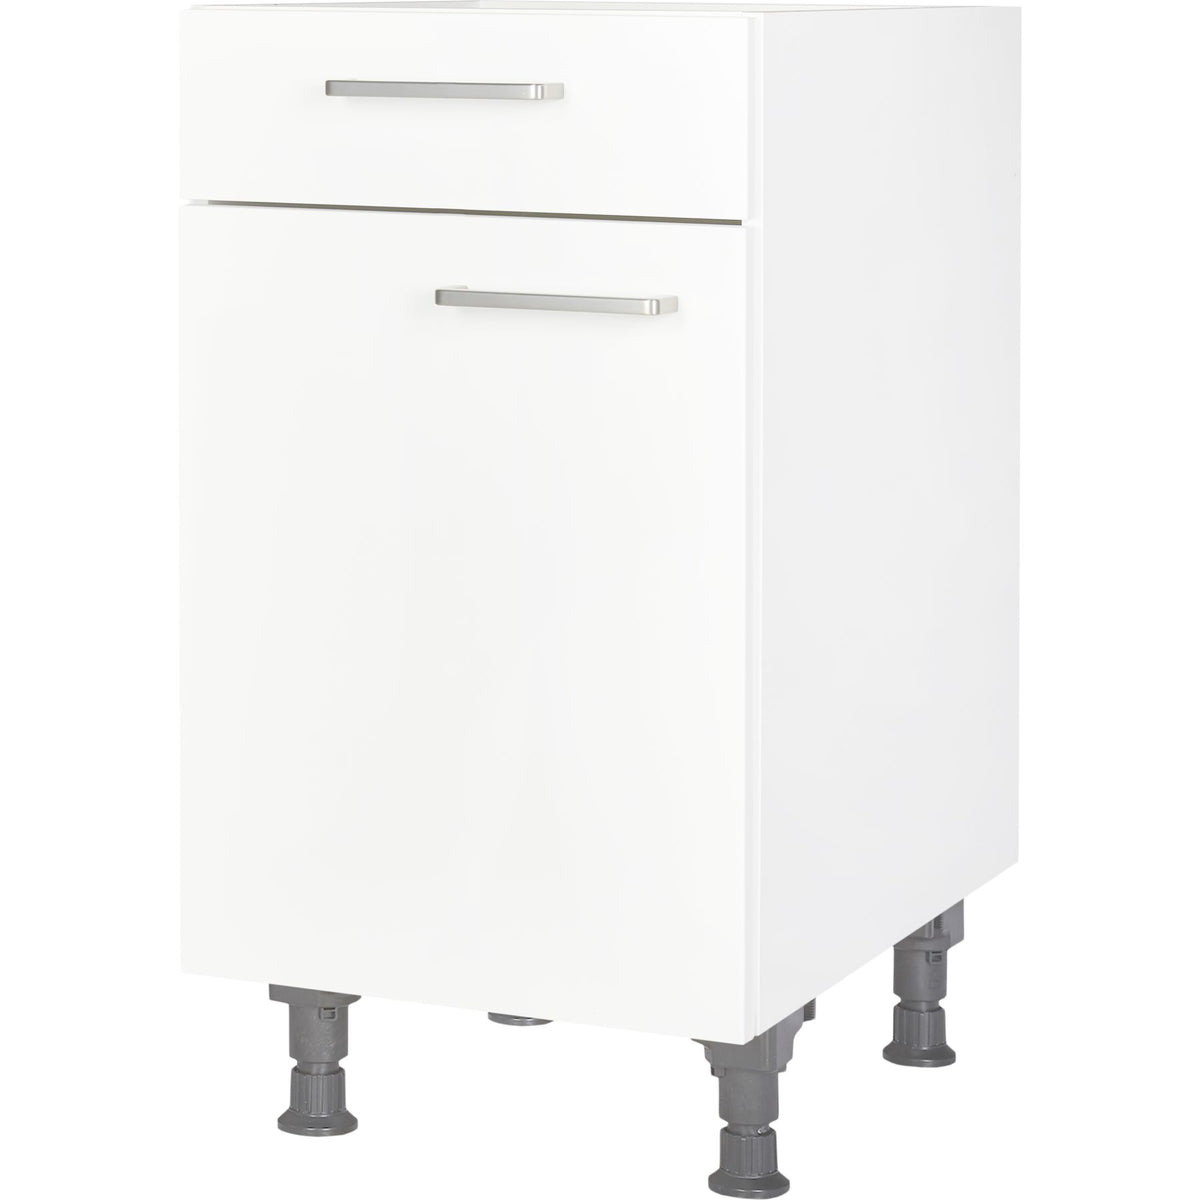 kitchen 60cm drawer white US with base cabinet nobilia d and 45cm 30cm